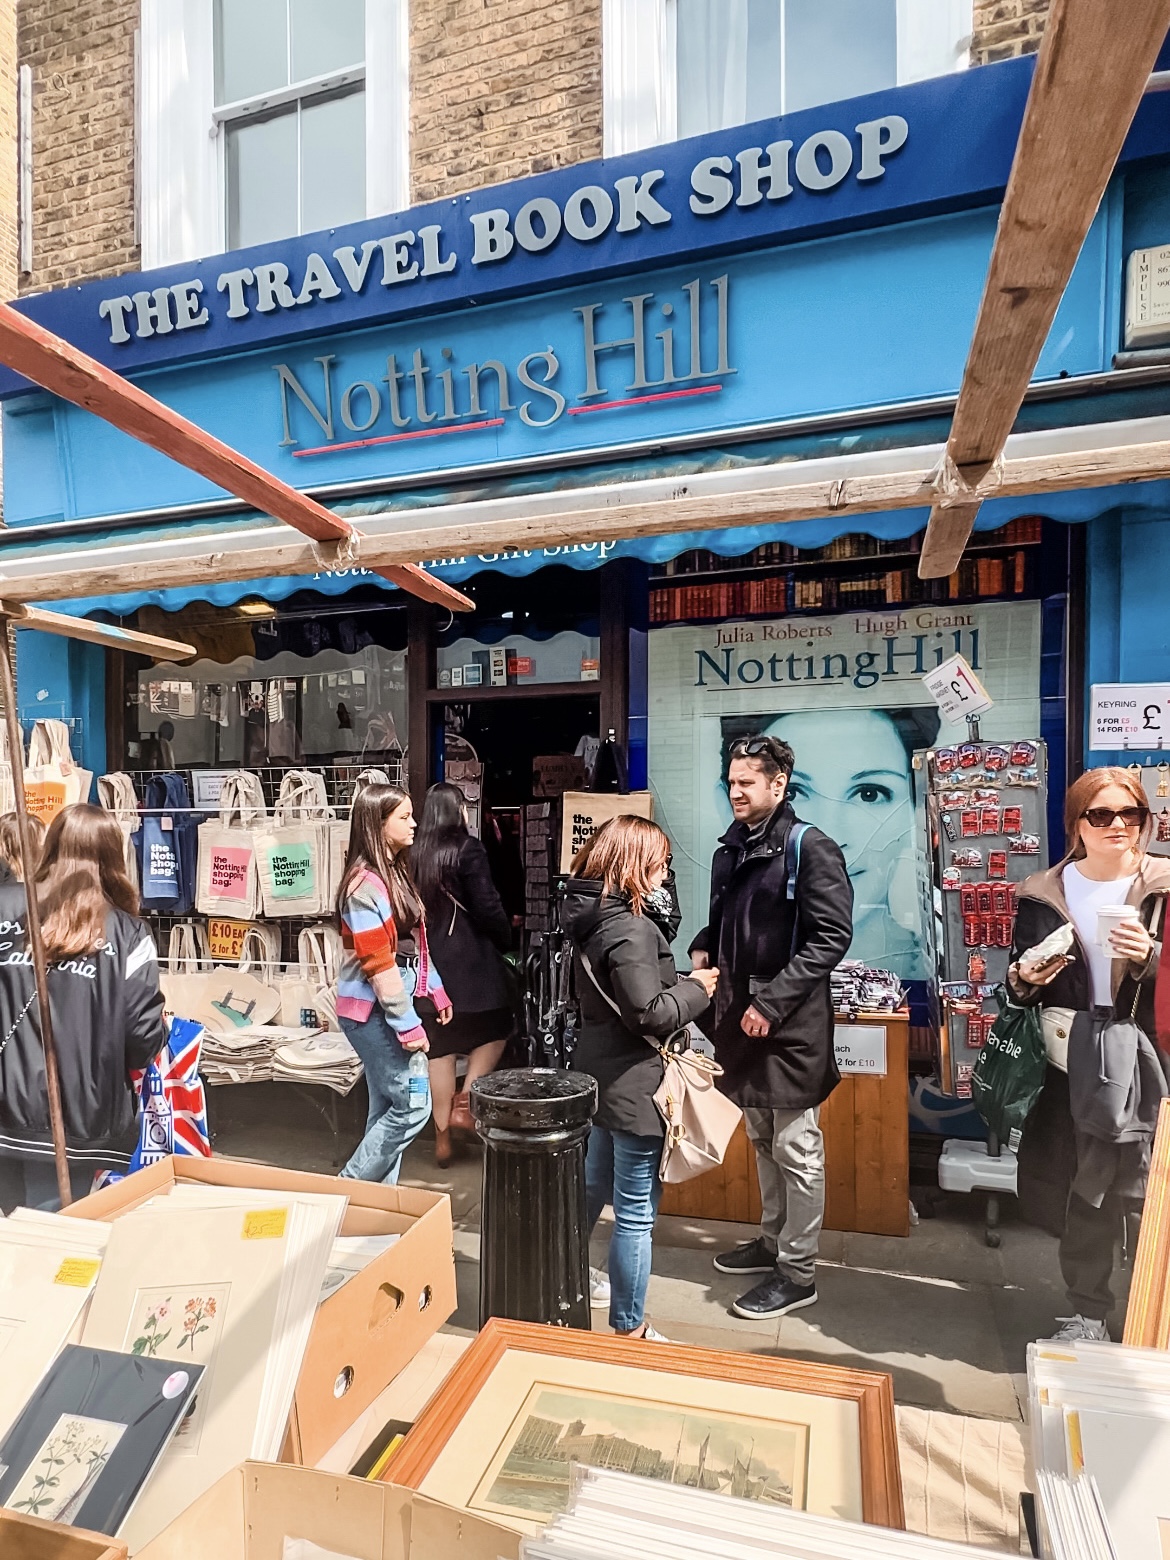 travel book store from the Notting Hill movie- filming locations in London